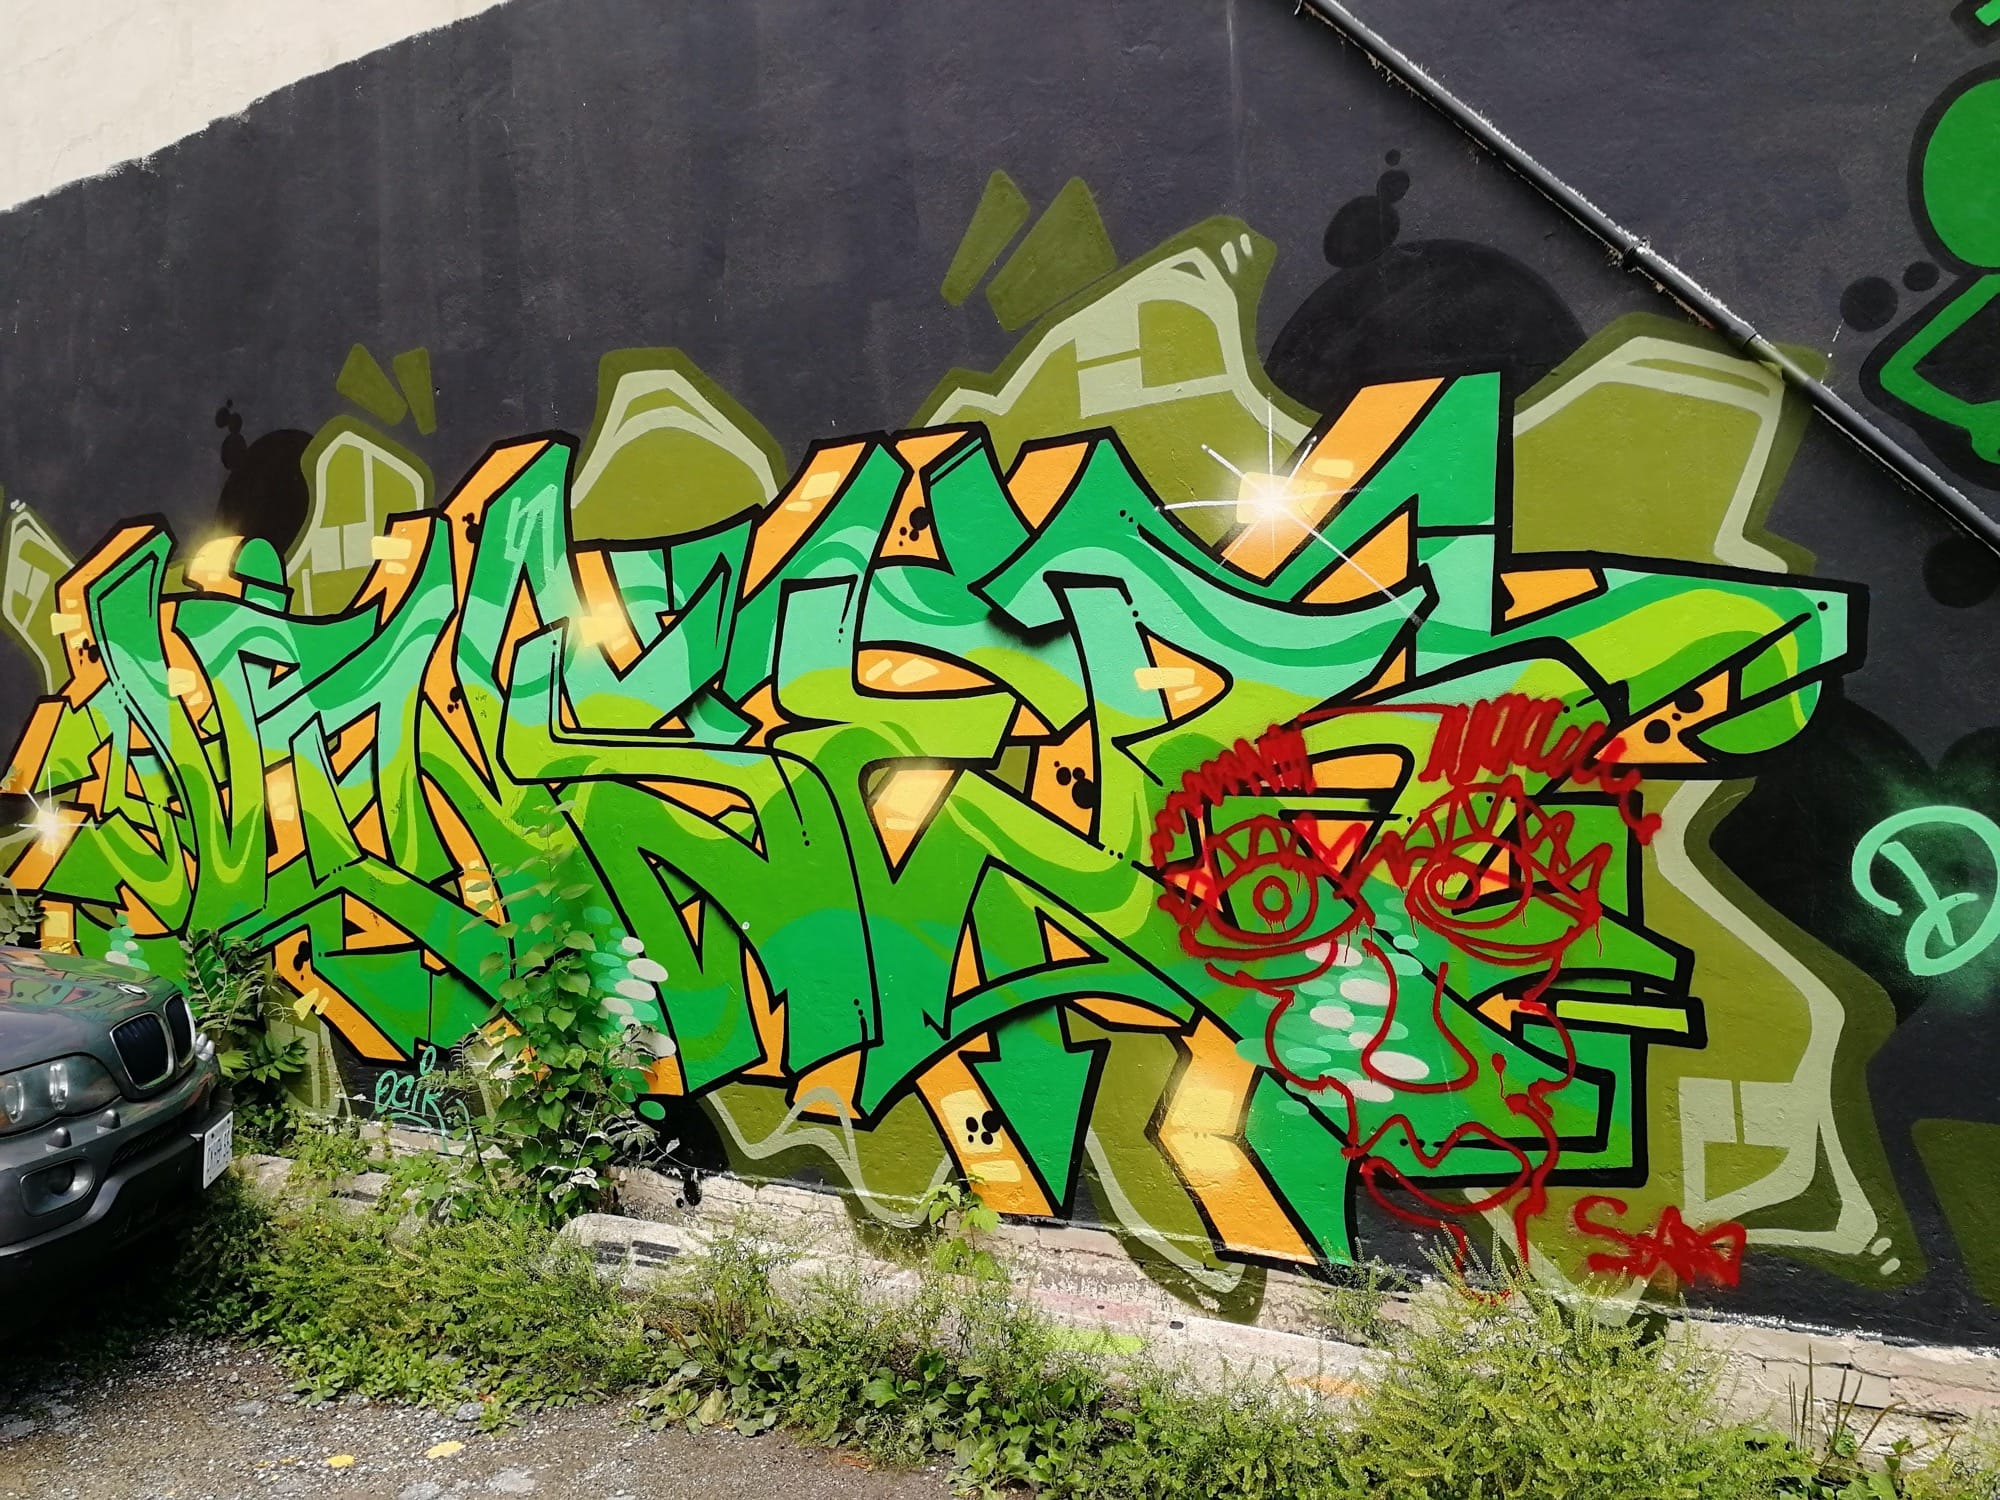 Graffiti 2468  captured by Rabot in Toronto Canada